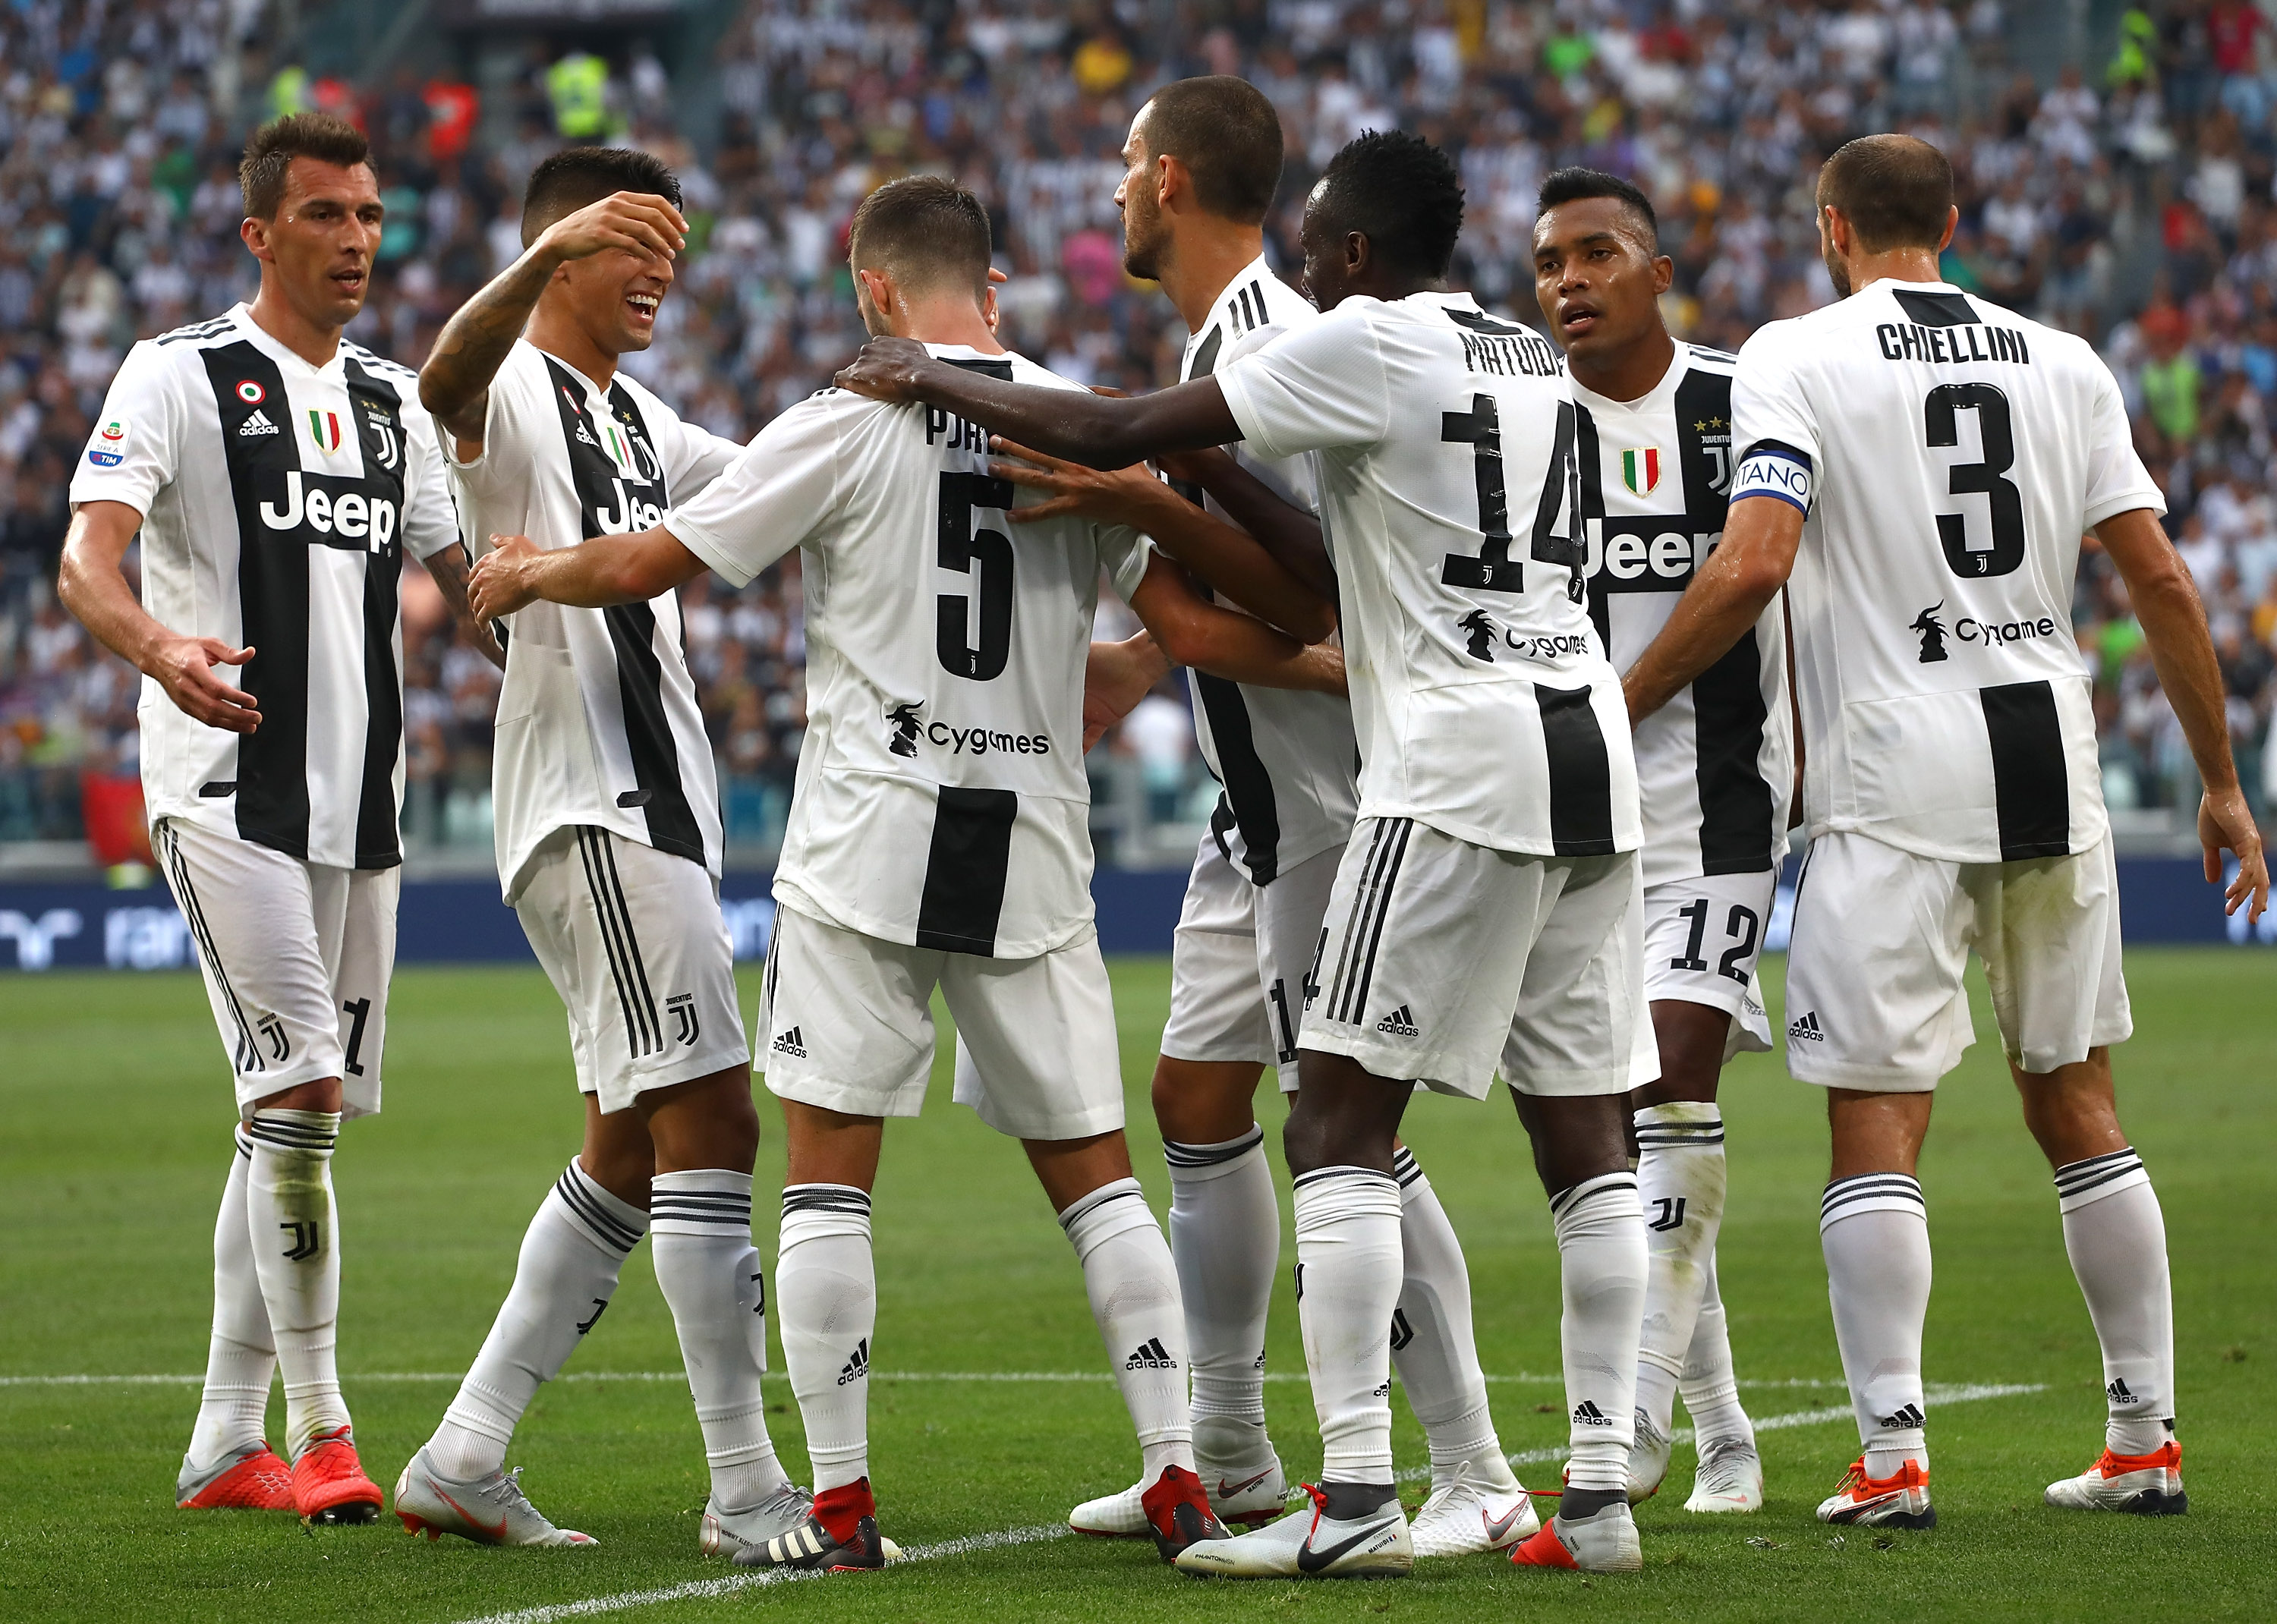 TURIN, ITALY - AUGUST 25:  Miralem Pjanic #5 of Juventus celebrates with his team-mates after scoring the opening goal during the Serie A match between Juventus and SS Lazio at Allianz Stadium on August 25, 2018 in Turin, Italy.  (Photo by Marco Luzzani/Getty Images)